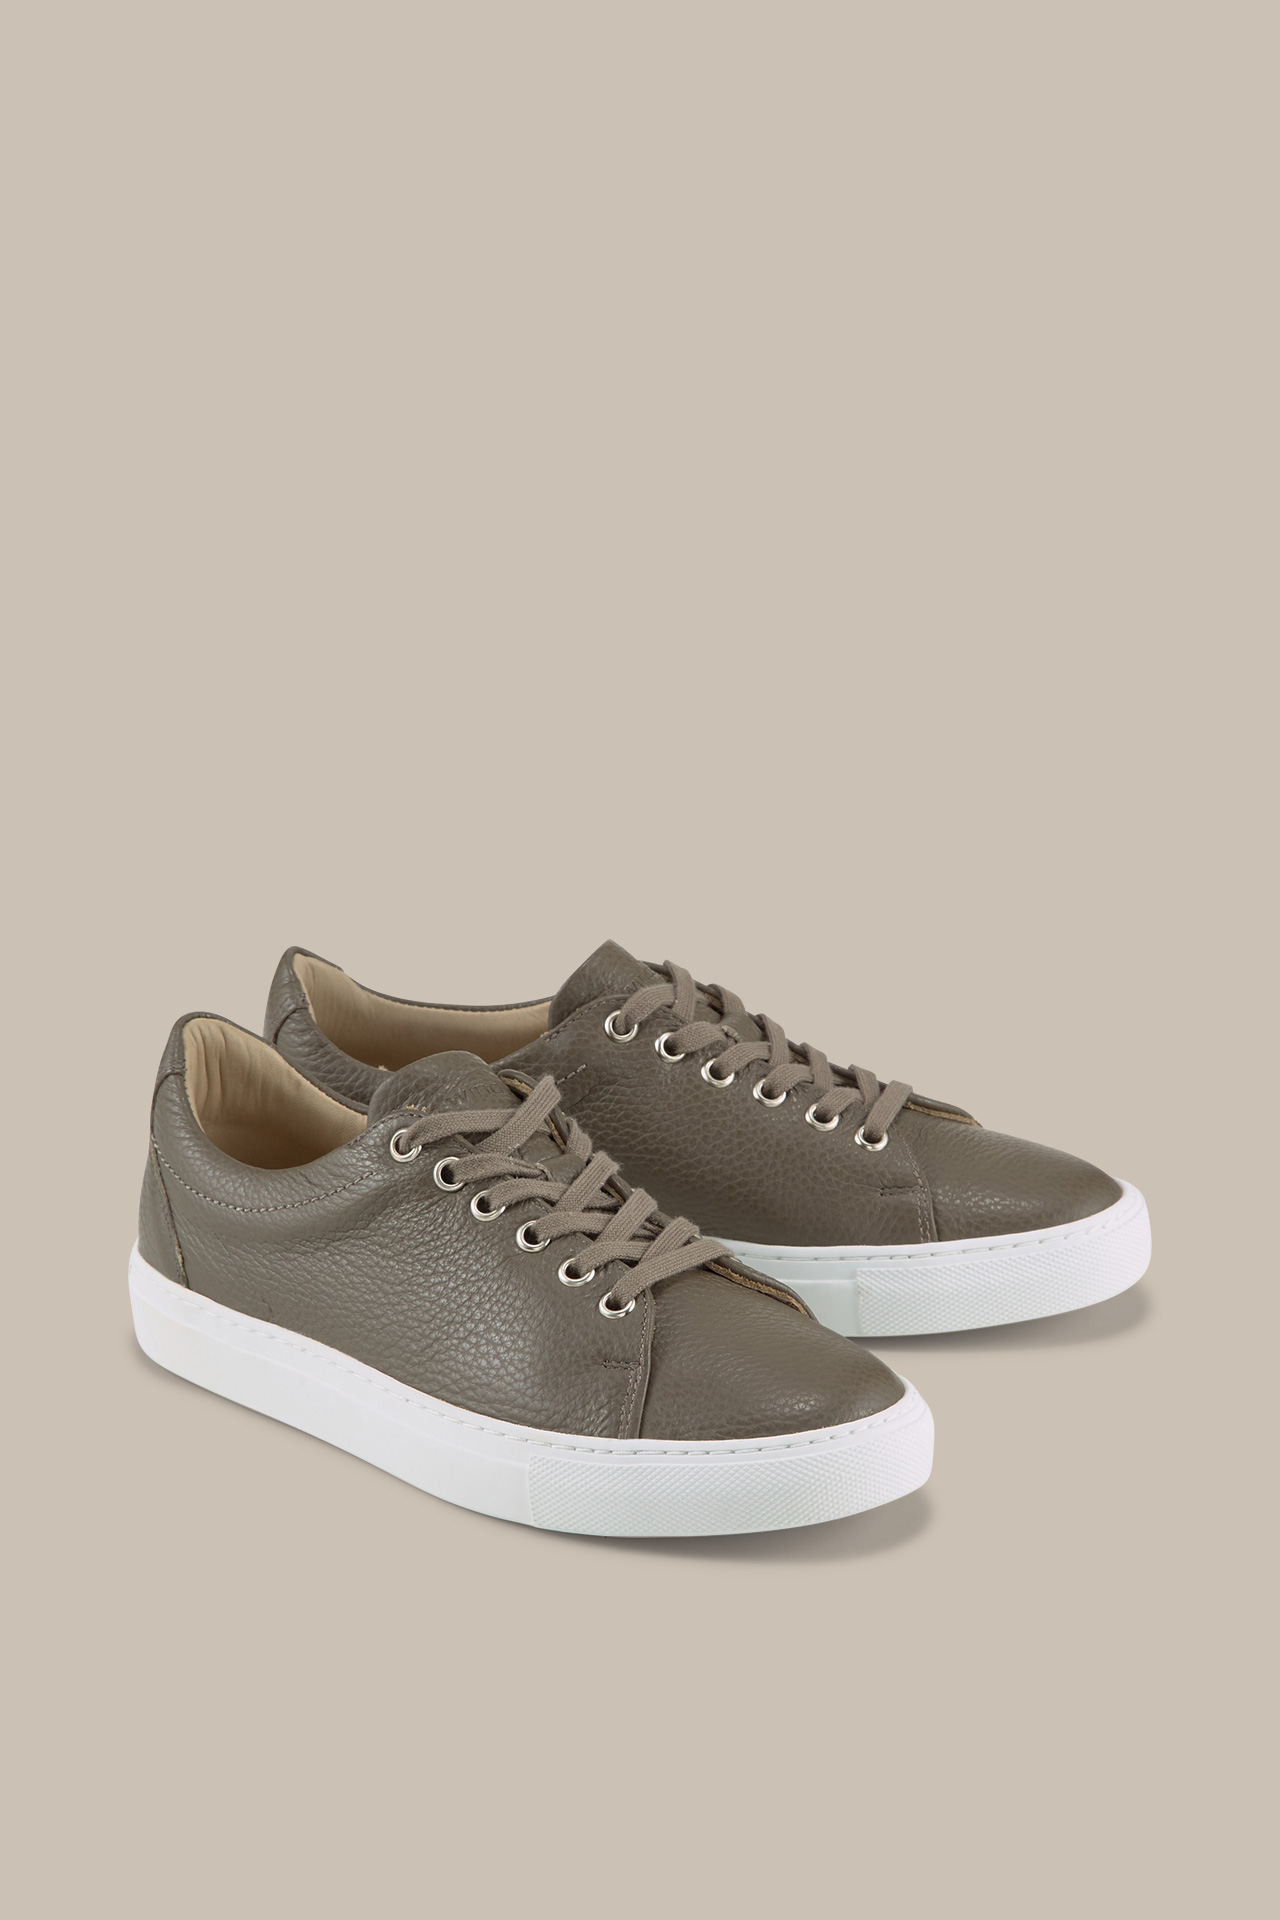 Sneaker Flat Tennis by Ludwig Reiter in Taupe